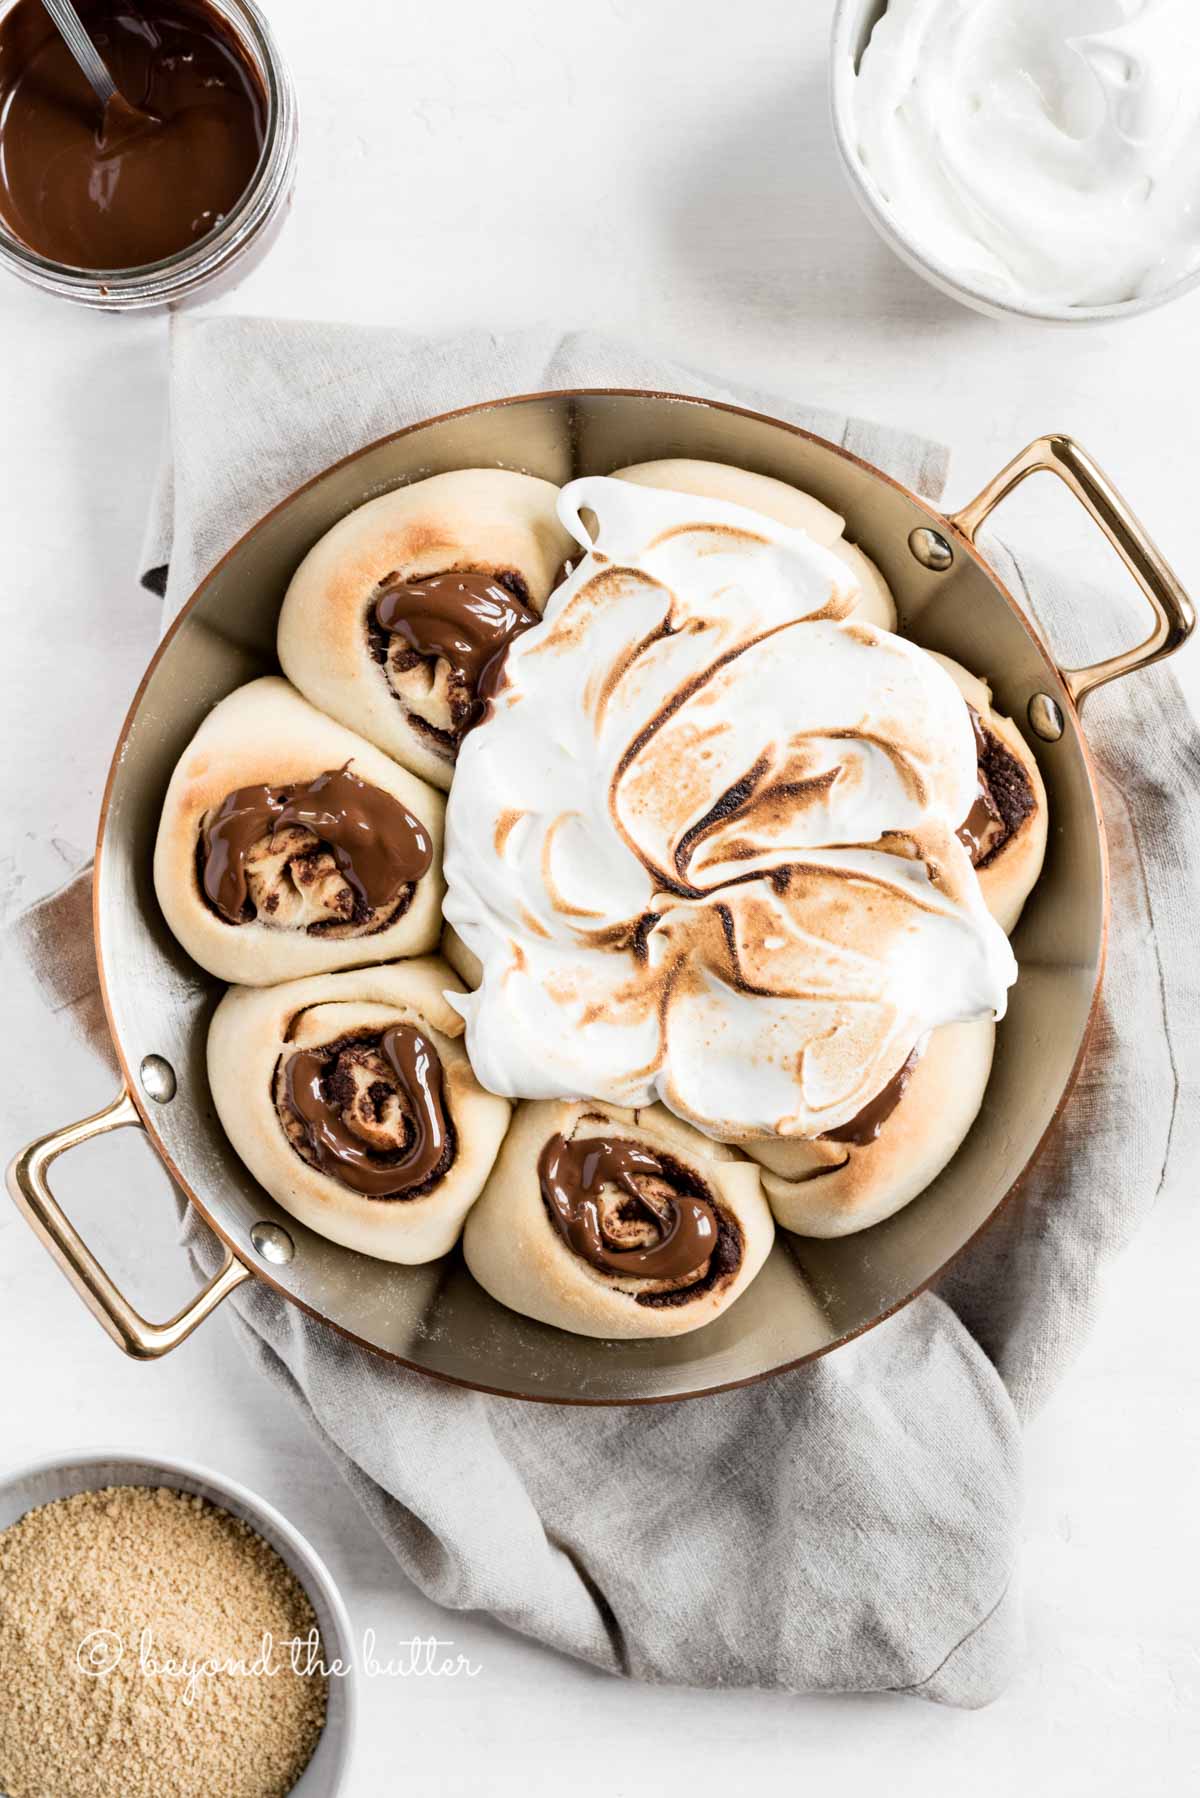 Overhead image of s'mores rolls partially covered with marshmallow topping | All Images © Beyond the Butter™